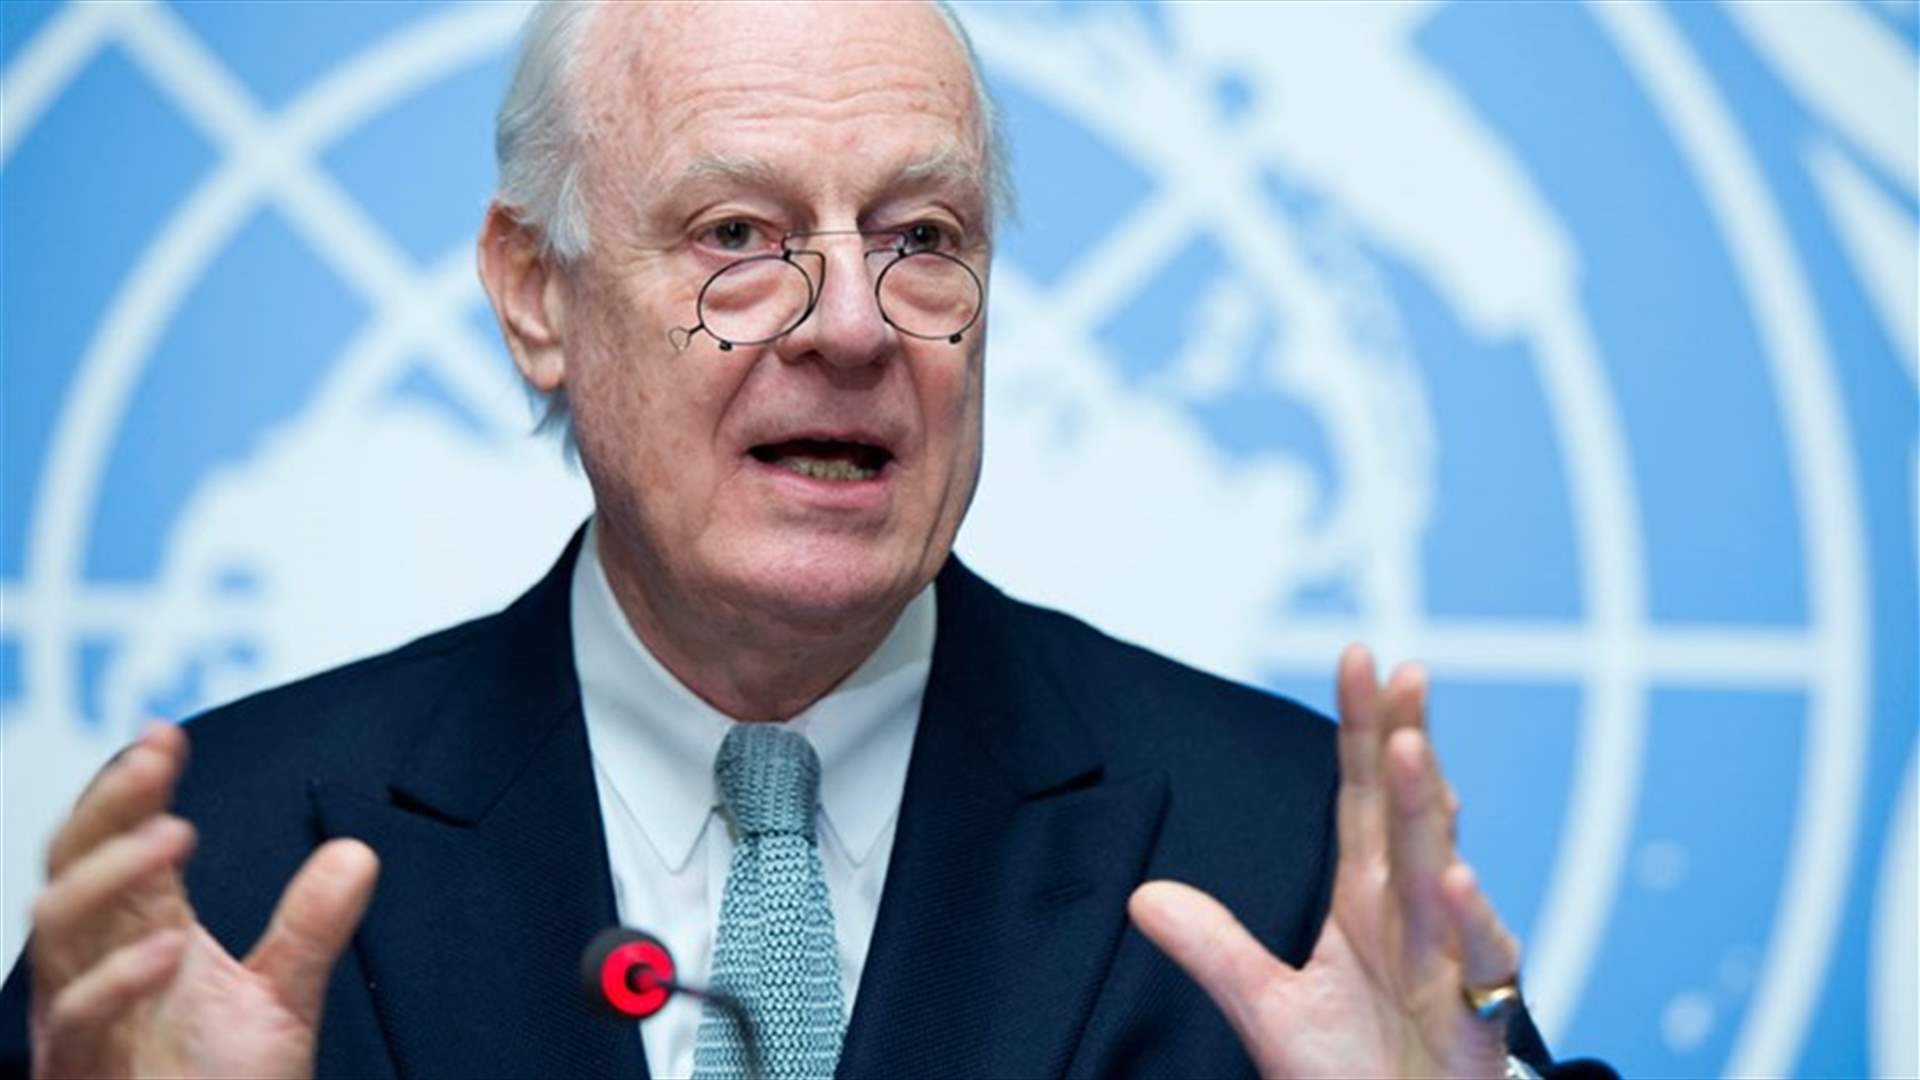 No Syria talks for 2-3 weeks, UN says